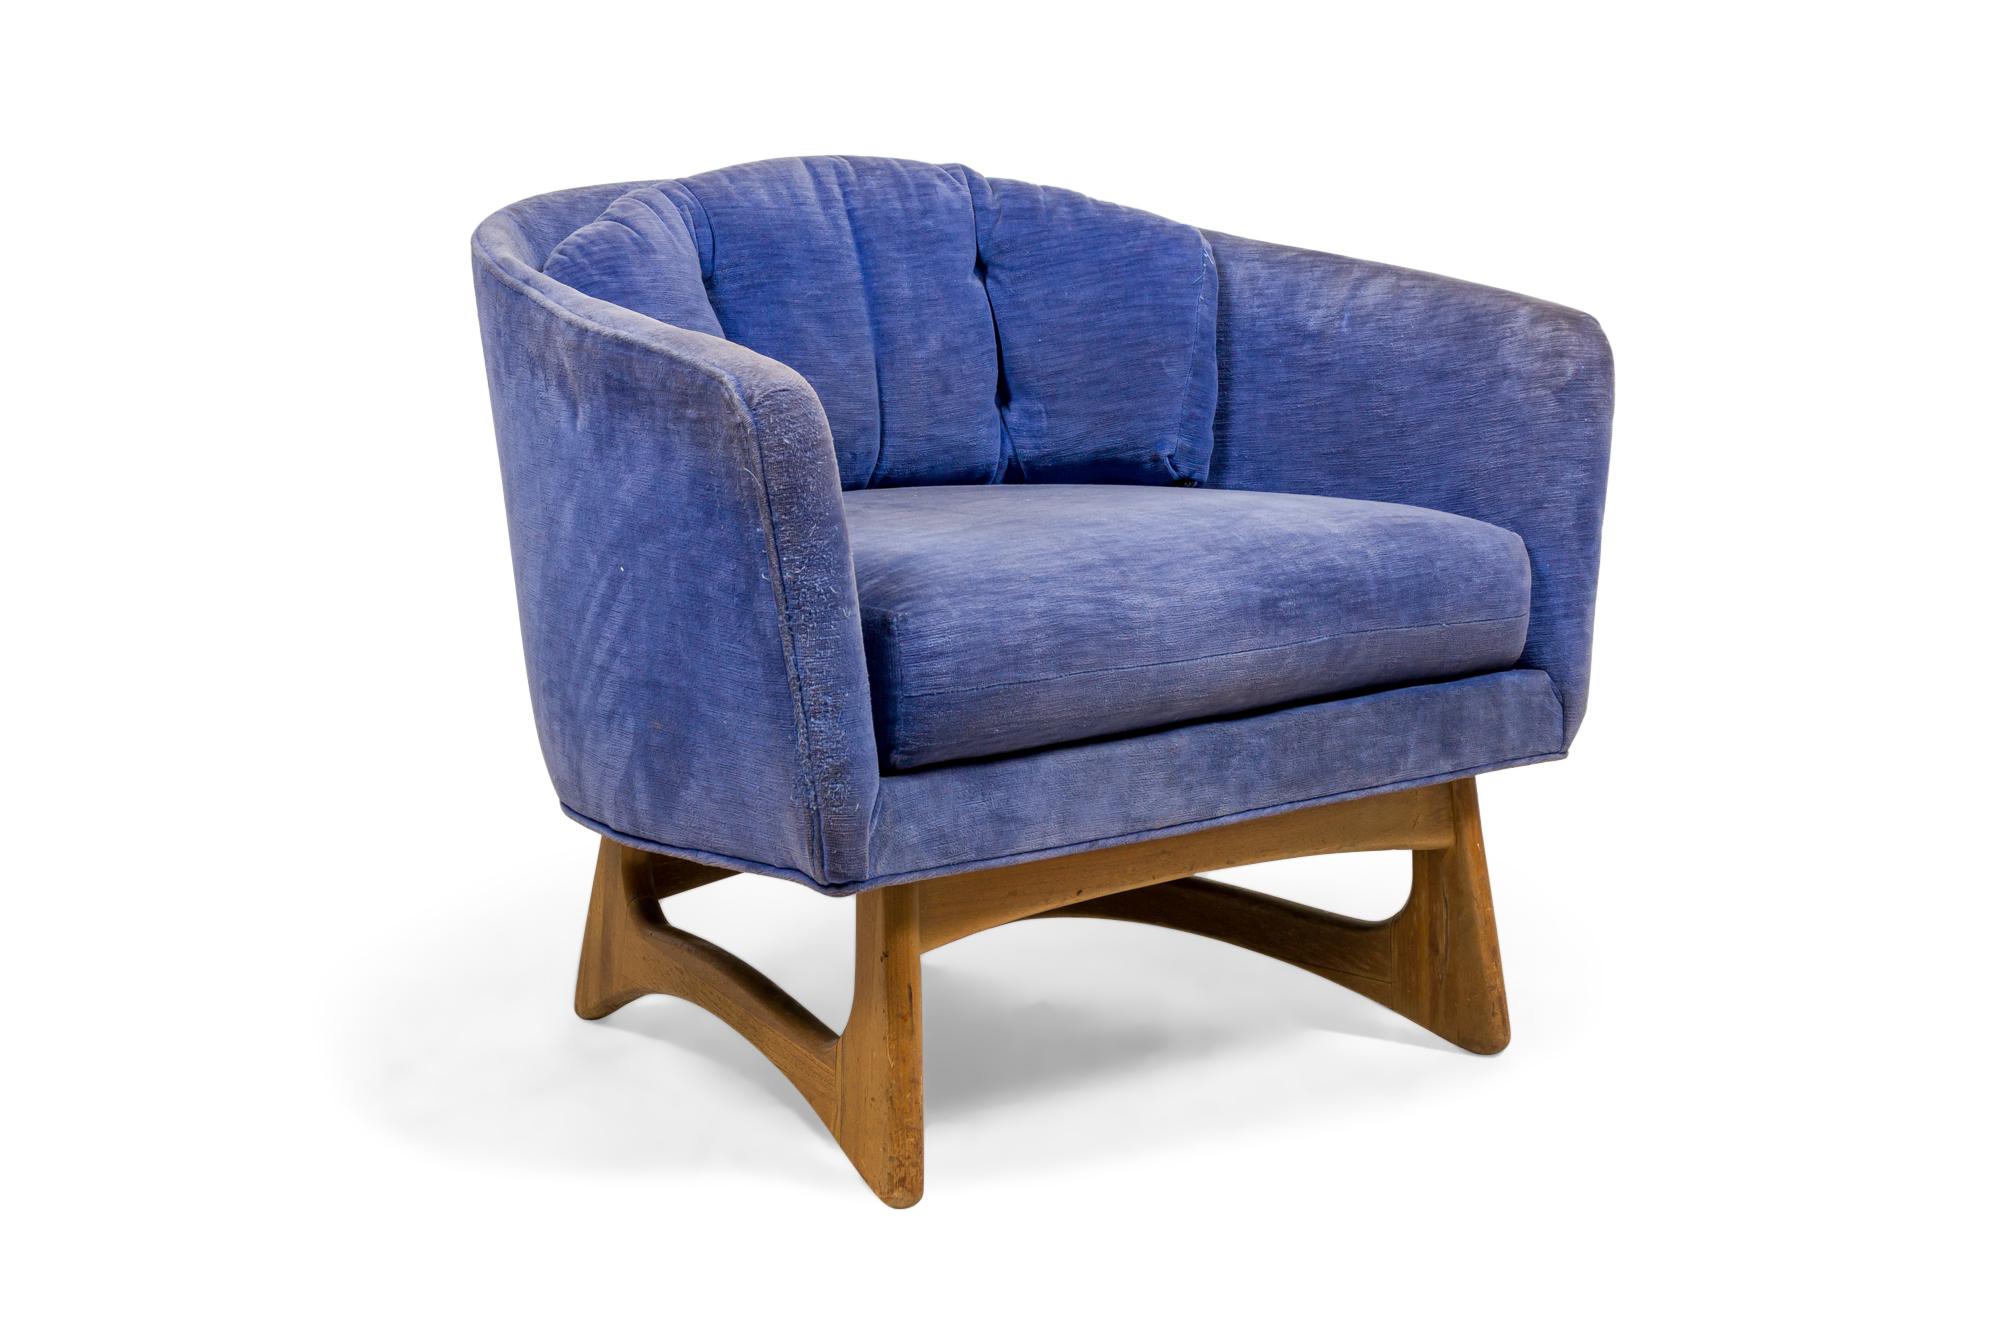 PAIR of American mid-century armchairs with freeform sculptured walnut frames and bases, curved backs, and periwinkle velour upholstery with channeled back cushions. (ADRIAN PEARSALL FOR CRAFT ASSOCIATES)(PRICED AS PAIR)